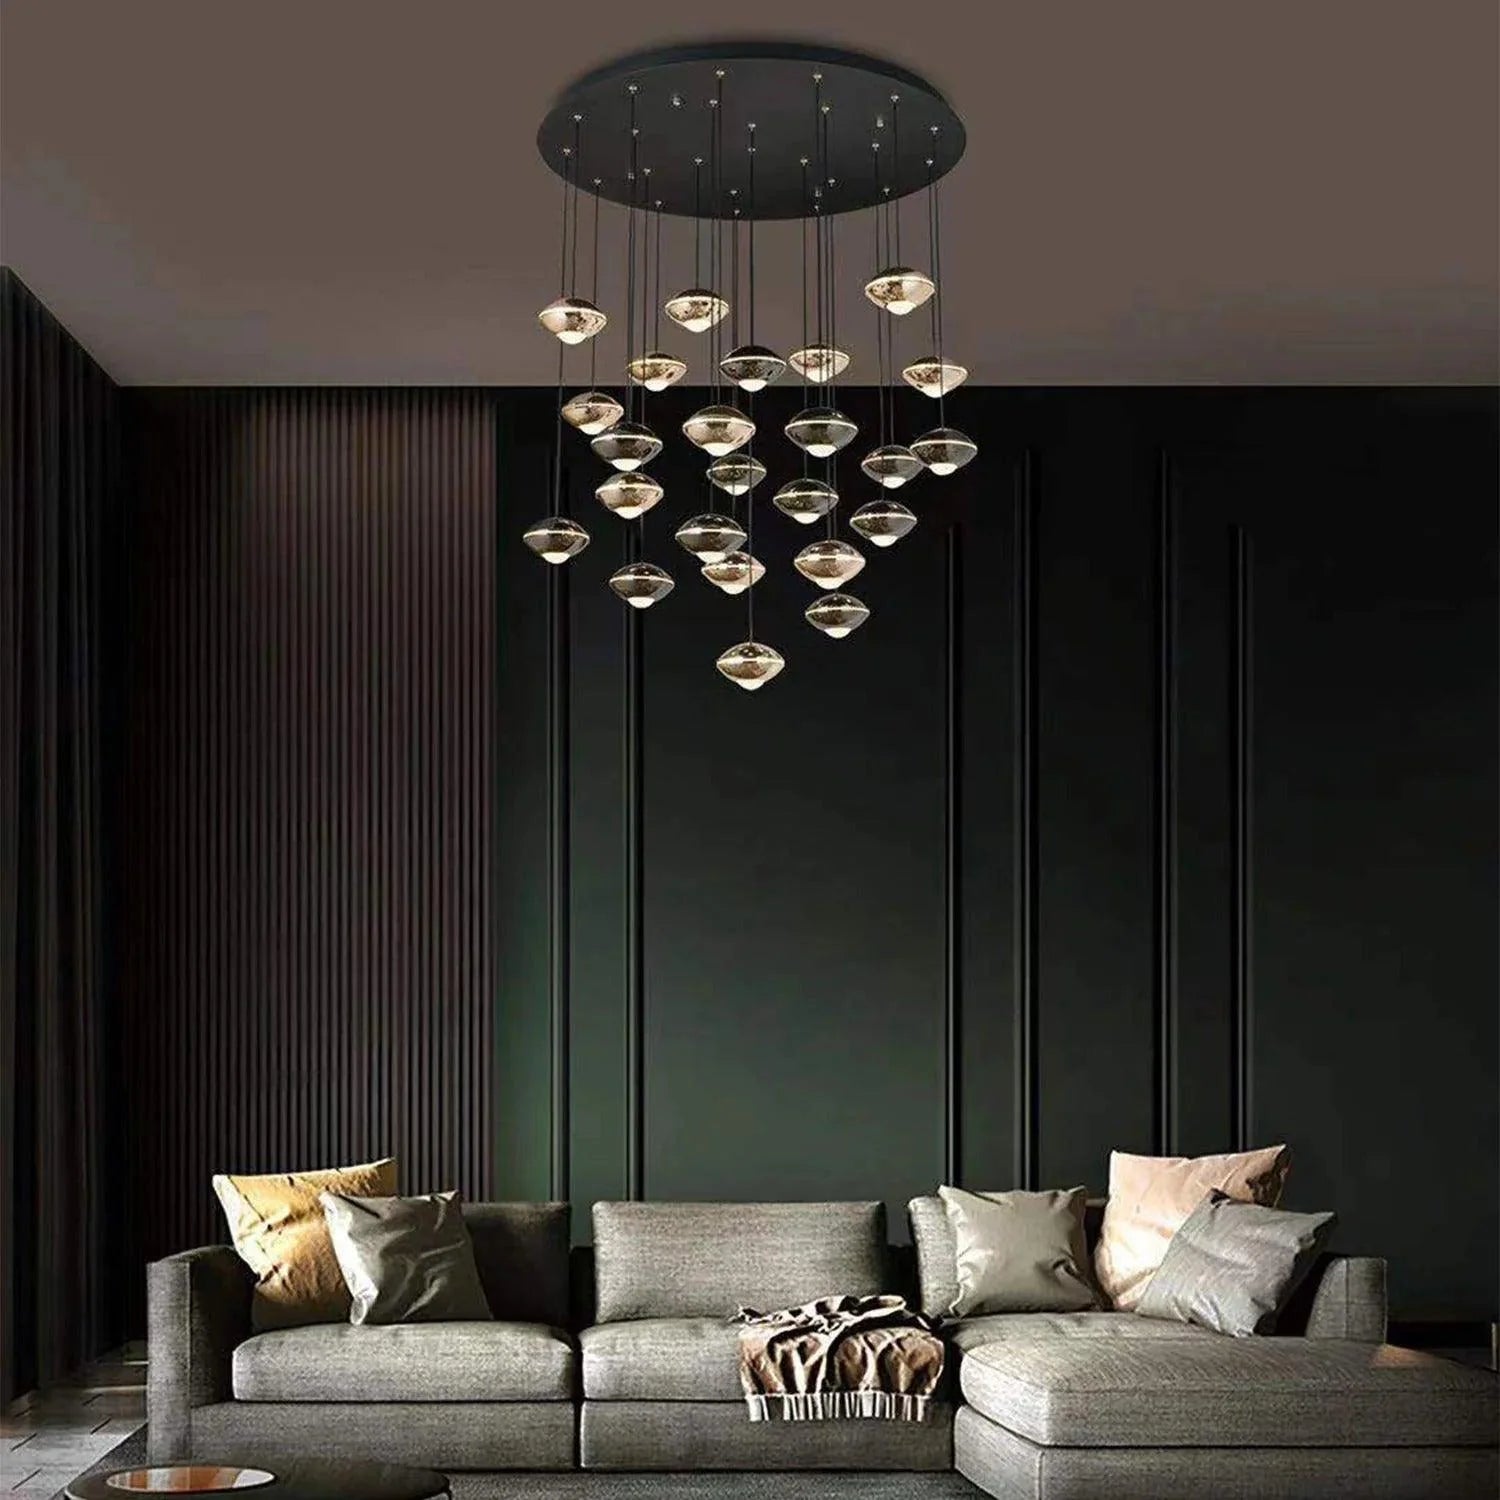 P0723-24A Premium Modern LED Chandelier For Living Room Restaurant Minimalist Gold and Pearl Black Long Hanging Chandeliers Lighting Fixtures